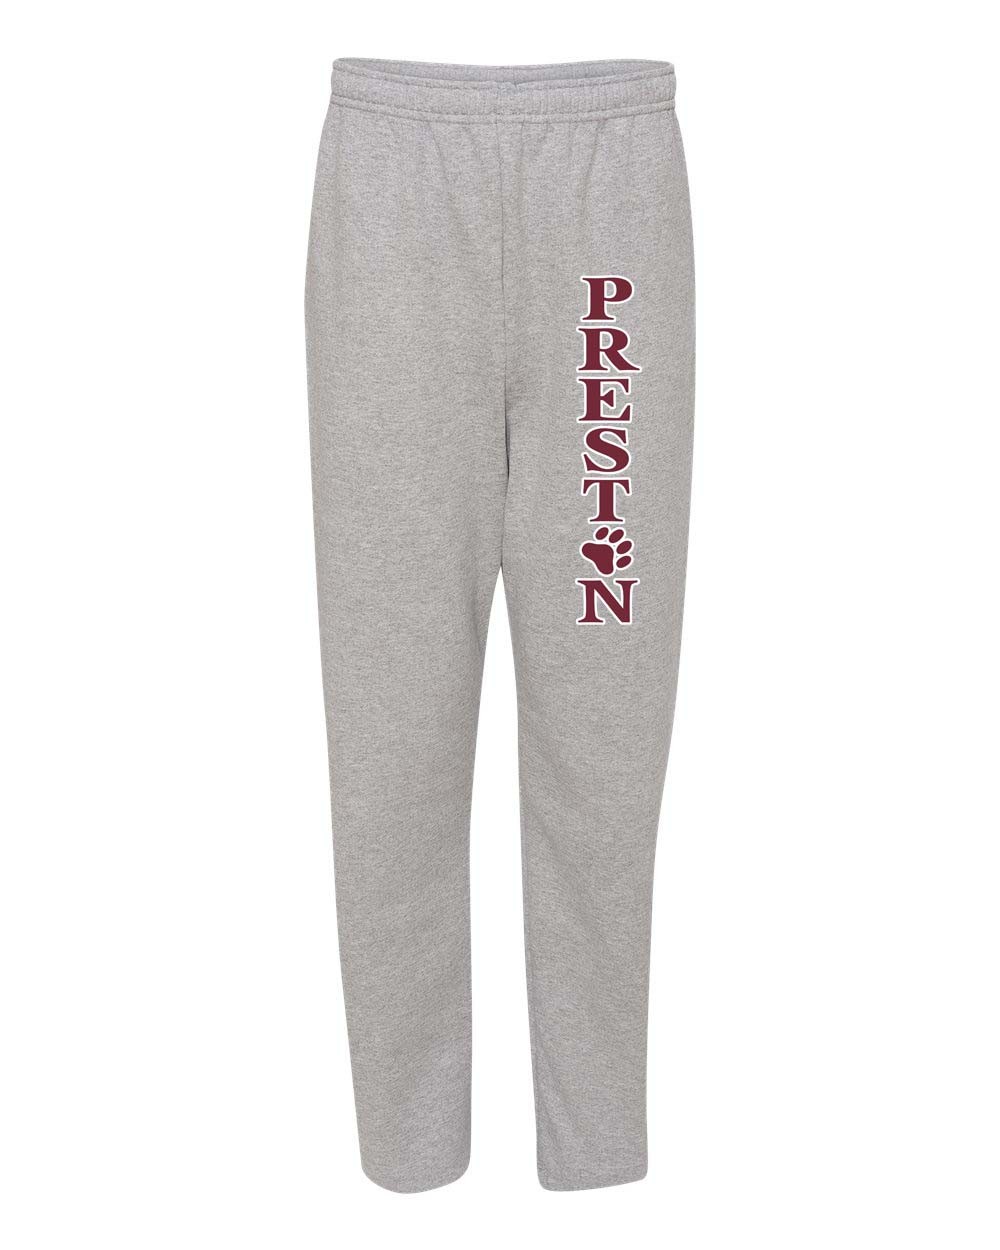 PHS Spirit Nonelastic Sweatpants w/ Paw Logo #12- Please Allow 2-3 Weeks for Fulfillment